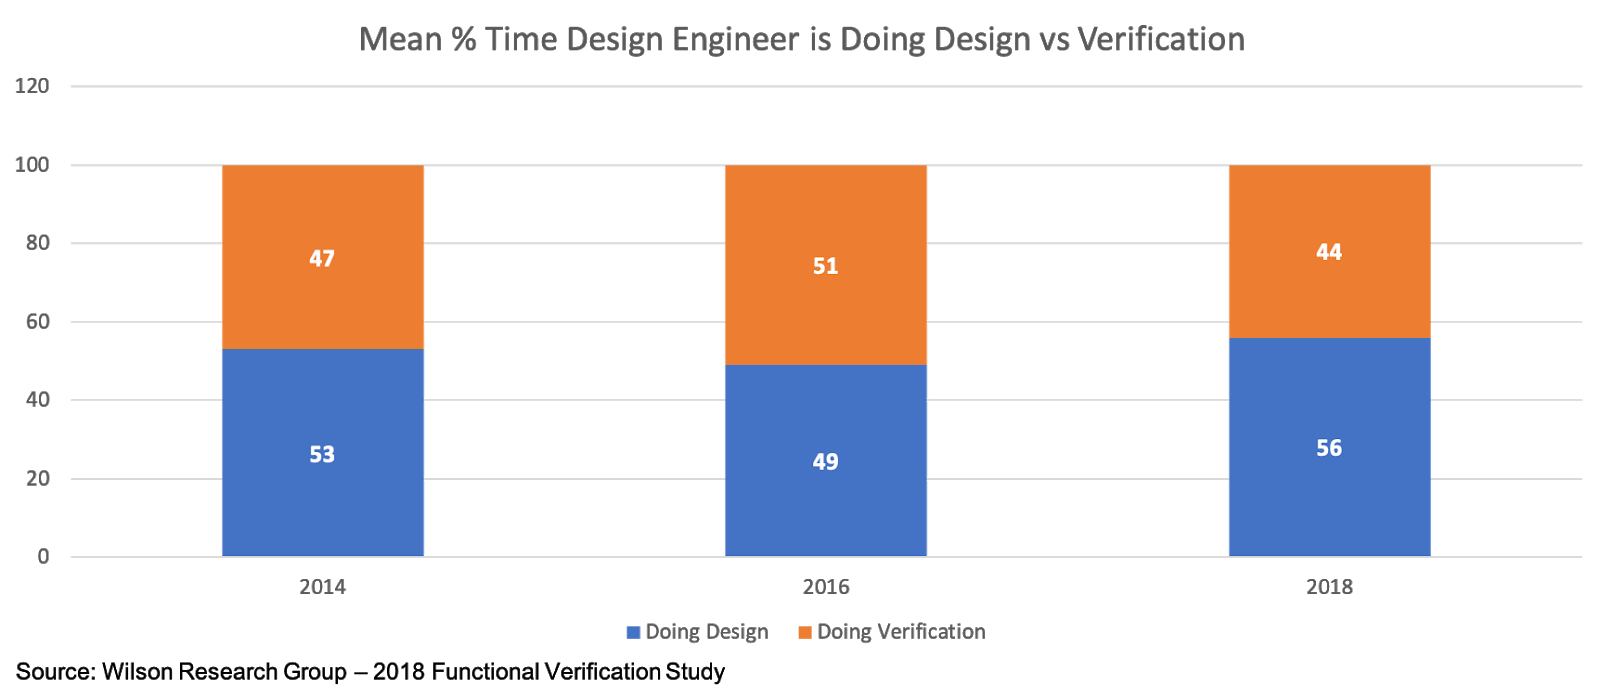 Time That Design Engineer is Designing vs Verifying